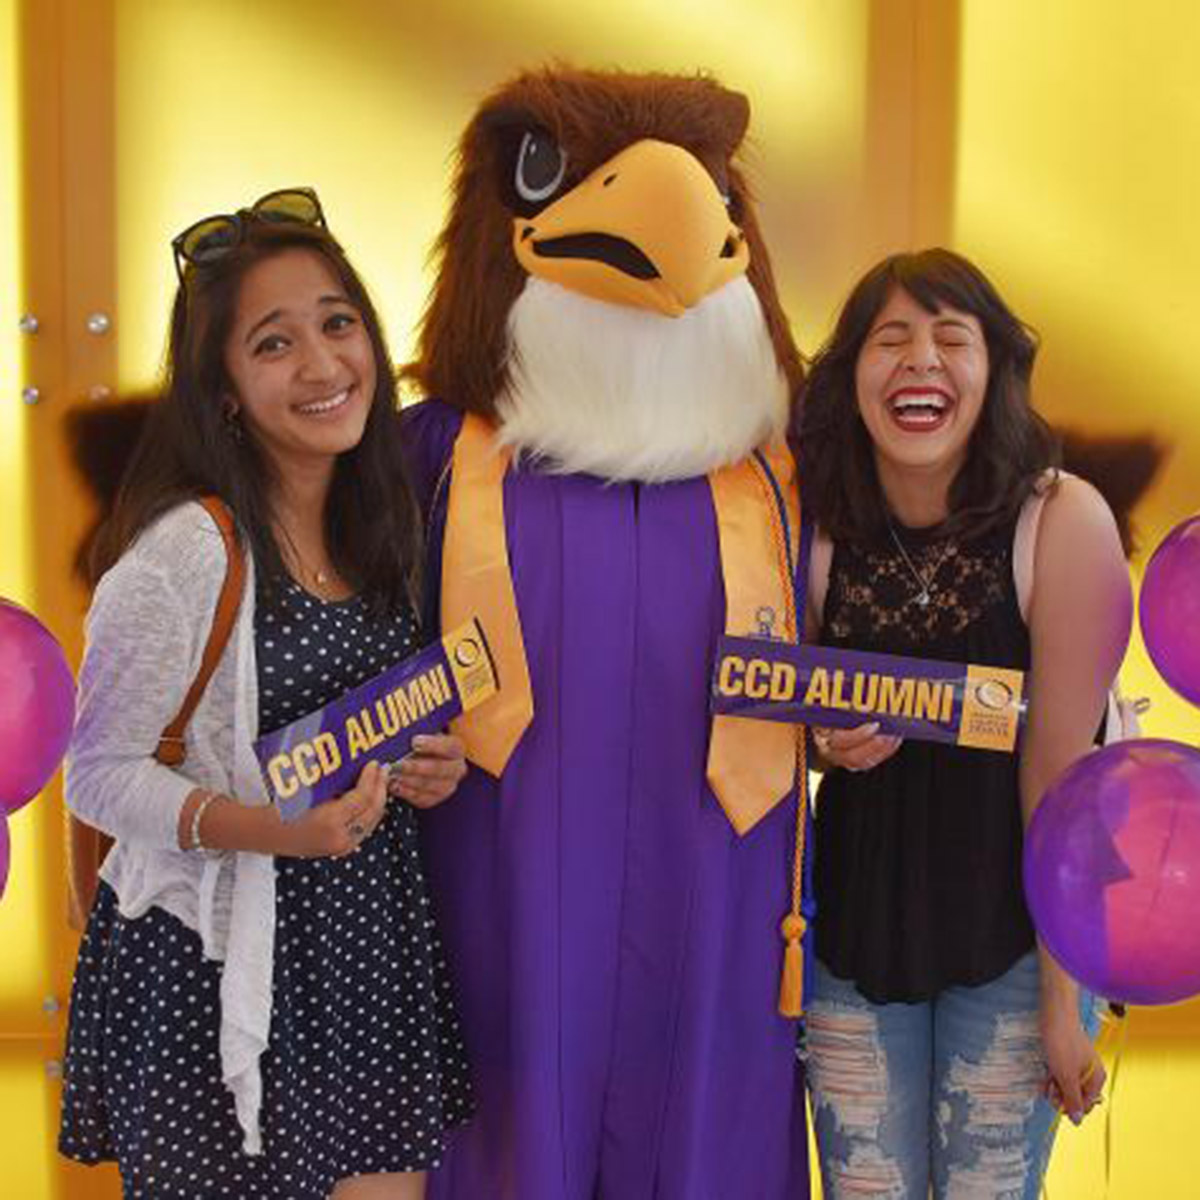 CCD Alumni with Swoop mascot